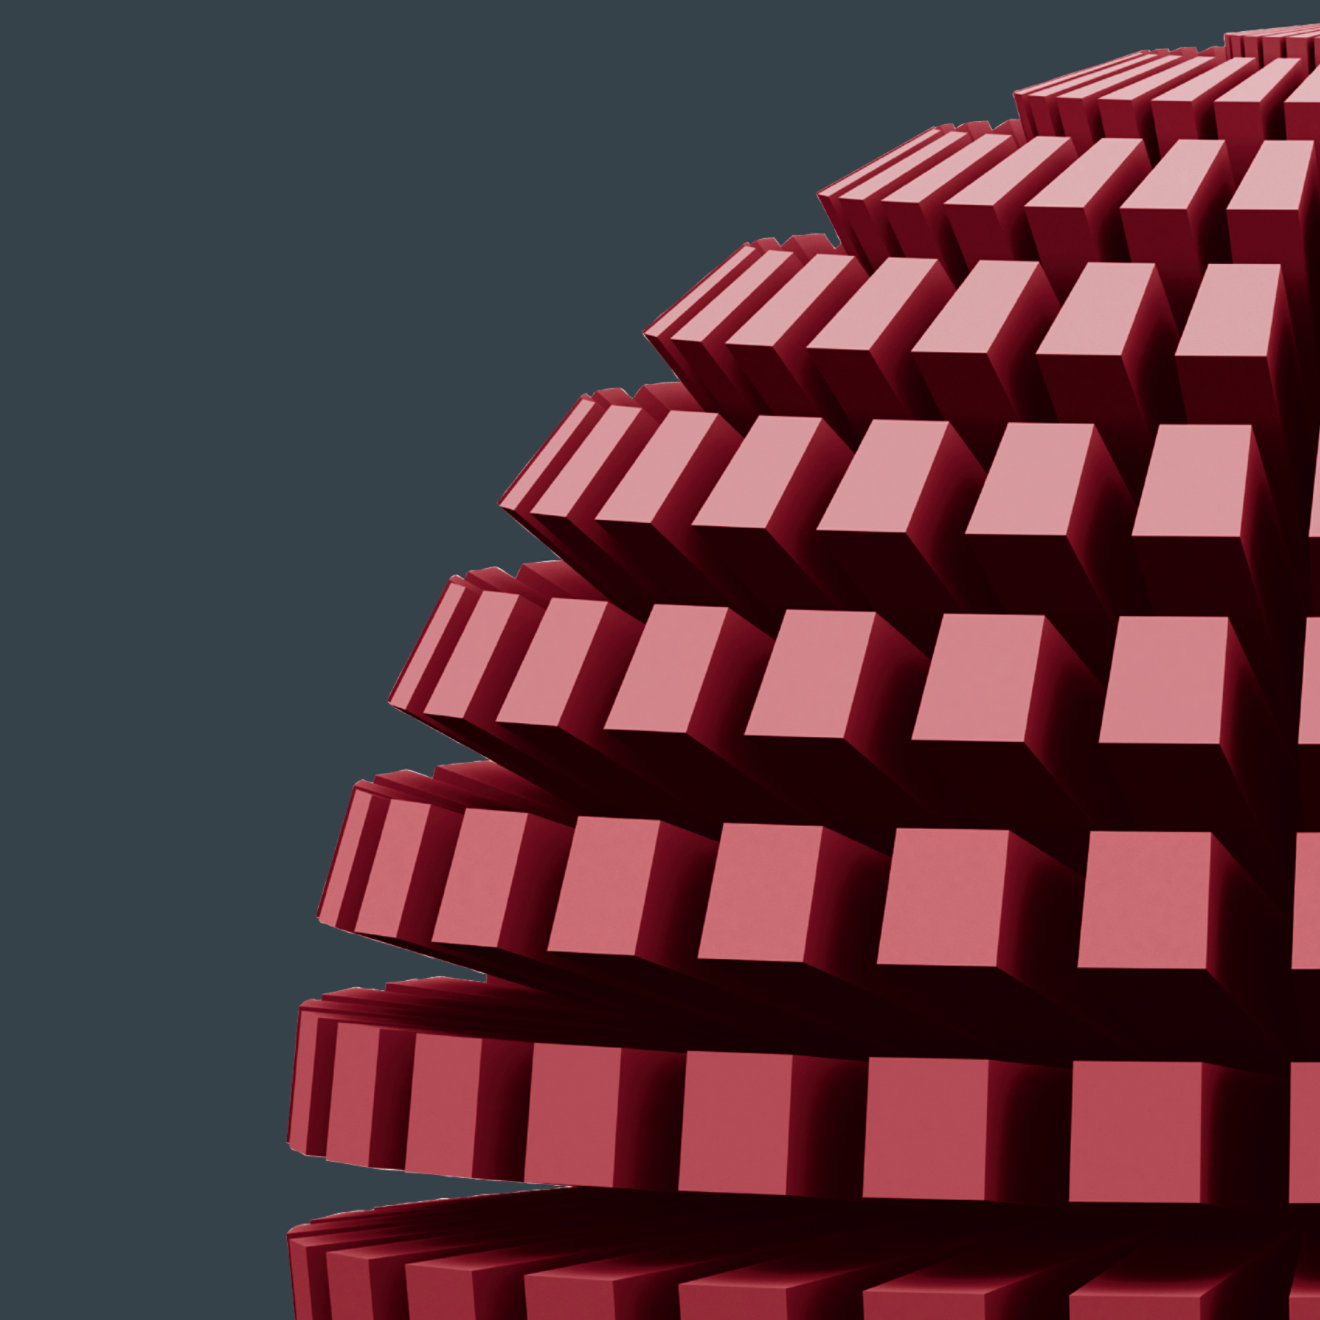 A 3d representation of a globe made up of red cuboids